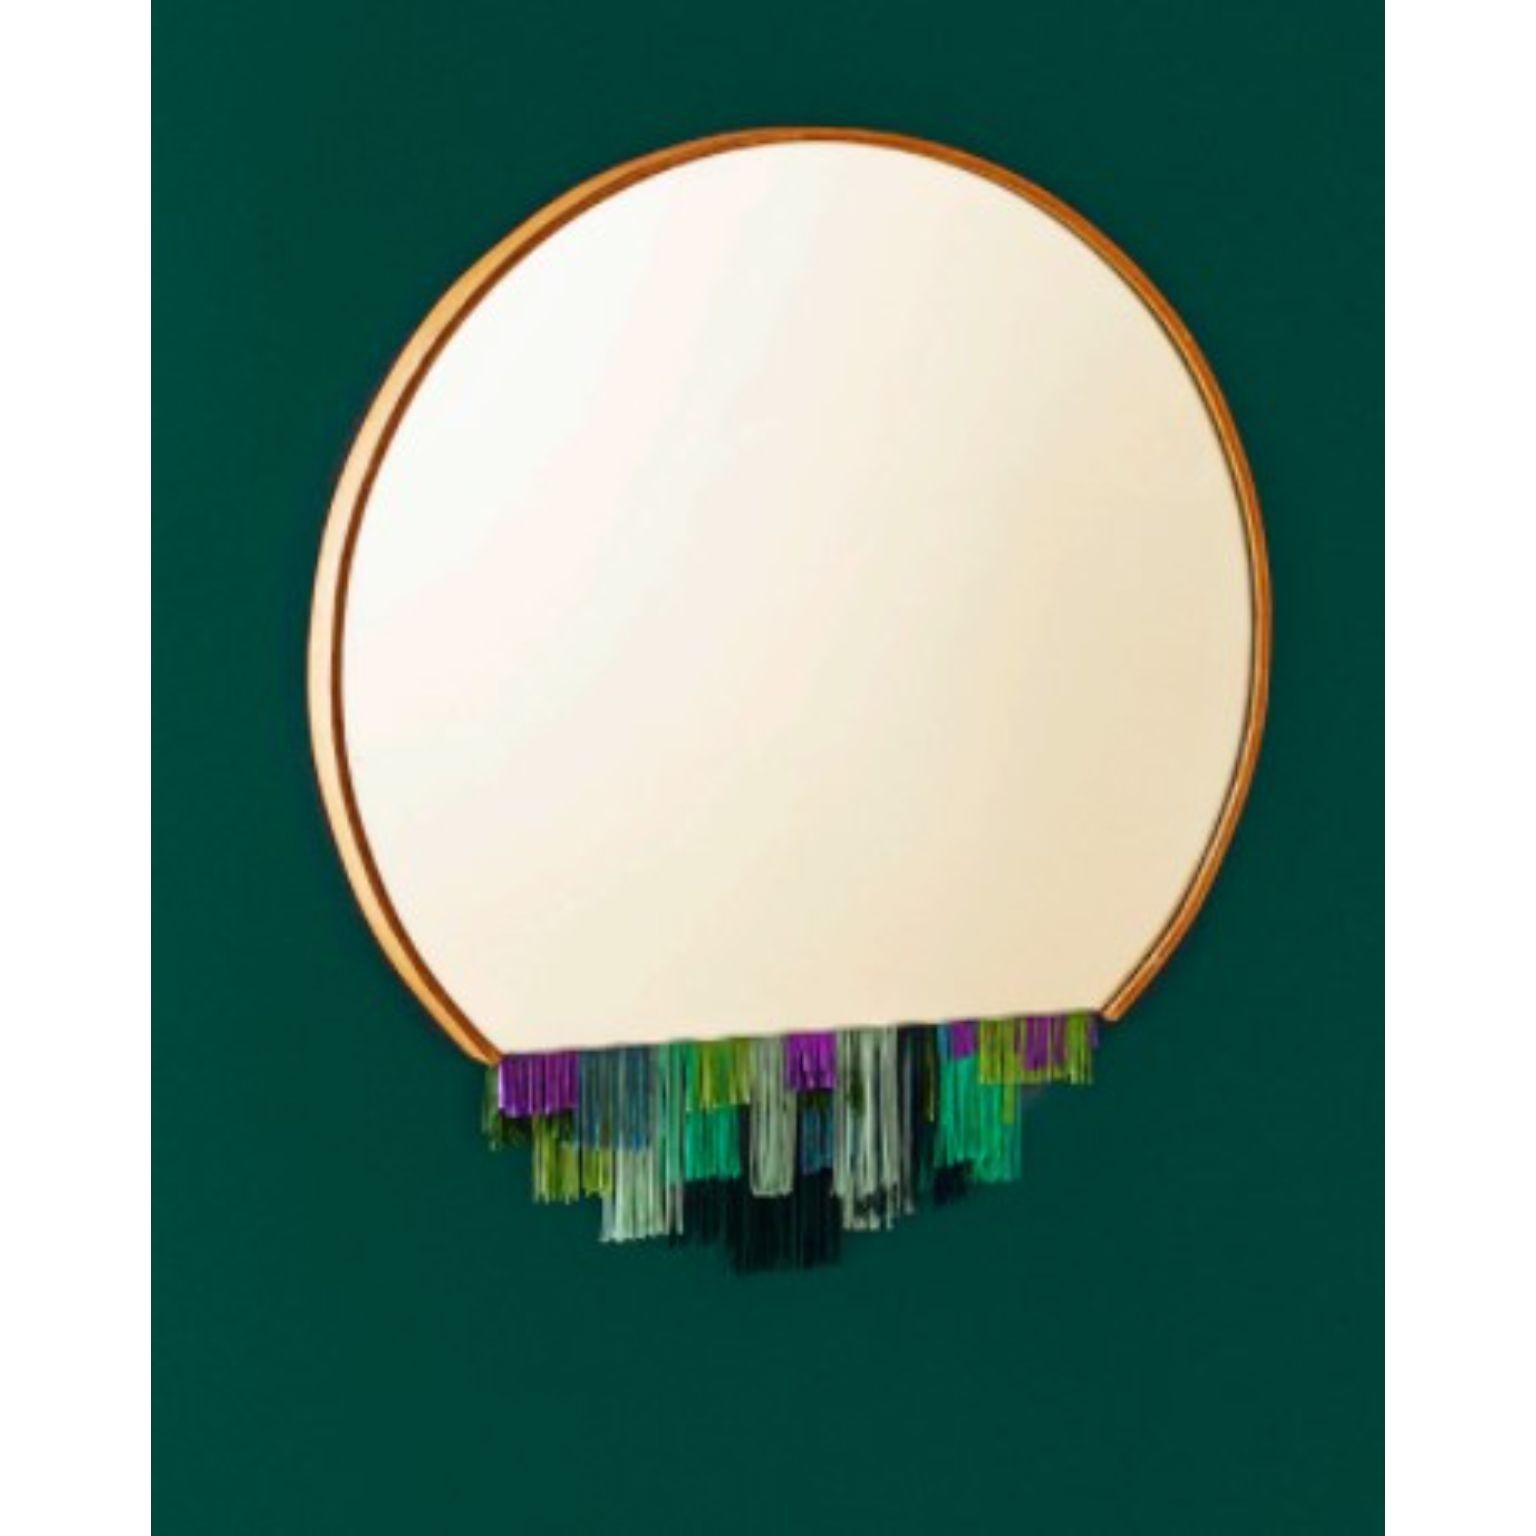 Fringe mirror green by Tero Kuitunen
Material: oak, glass mirror, textile fringes.
Dimensions: D 53 x W 53 x H 3 cm
Also available: different colors.

Do you remember the old fabric lamp shades with fringe edges? I love how they evoke the urge